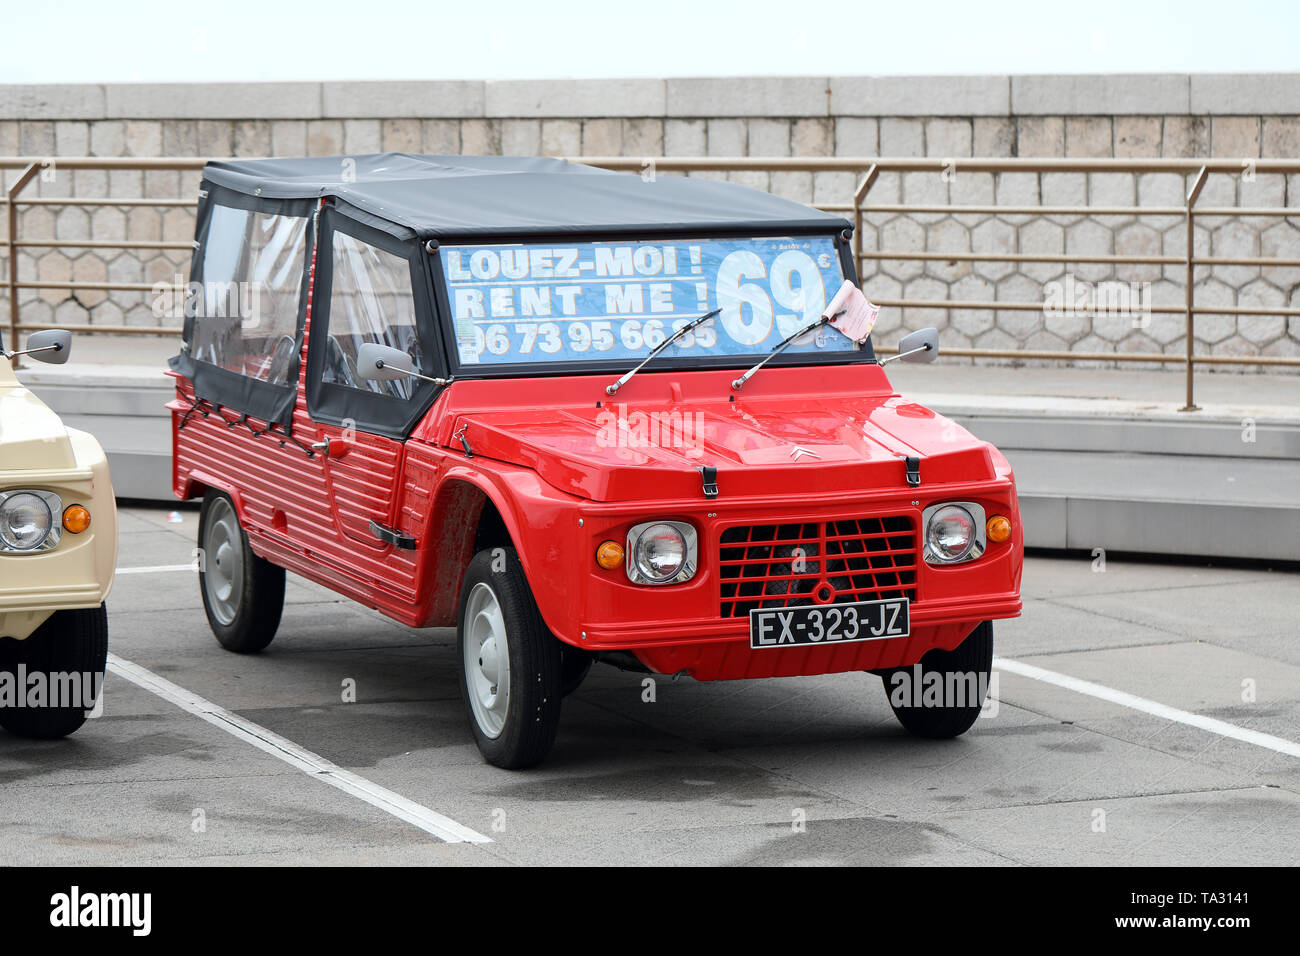 Nice, France - May 21, 2019: Vintage Red Citroen Mehari (Front View) French Car Parked In A Parking Lot In Nice On The French Riviera Stock Photo